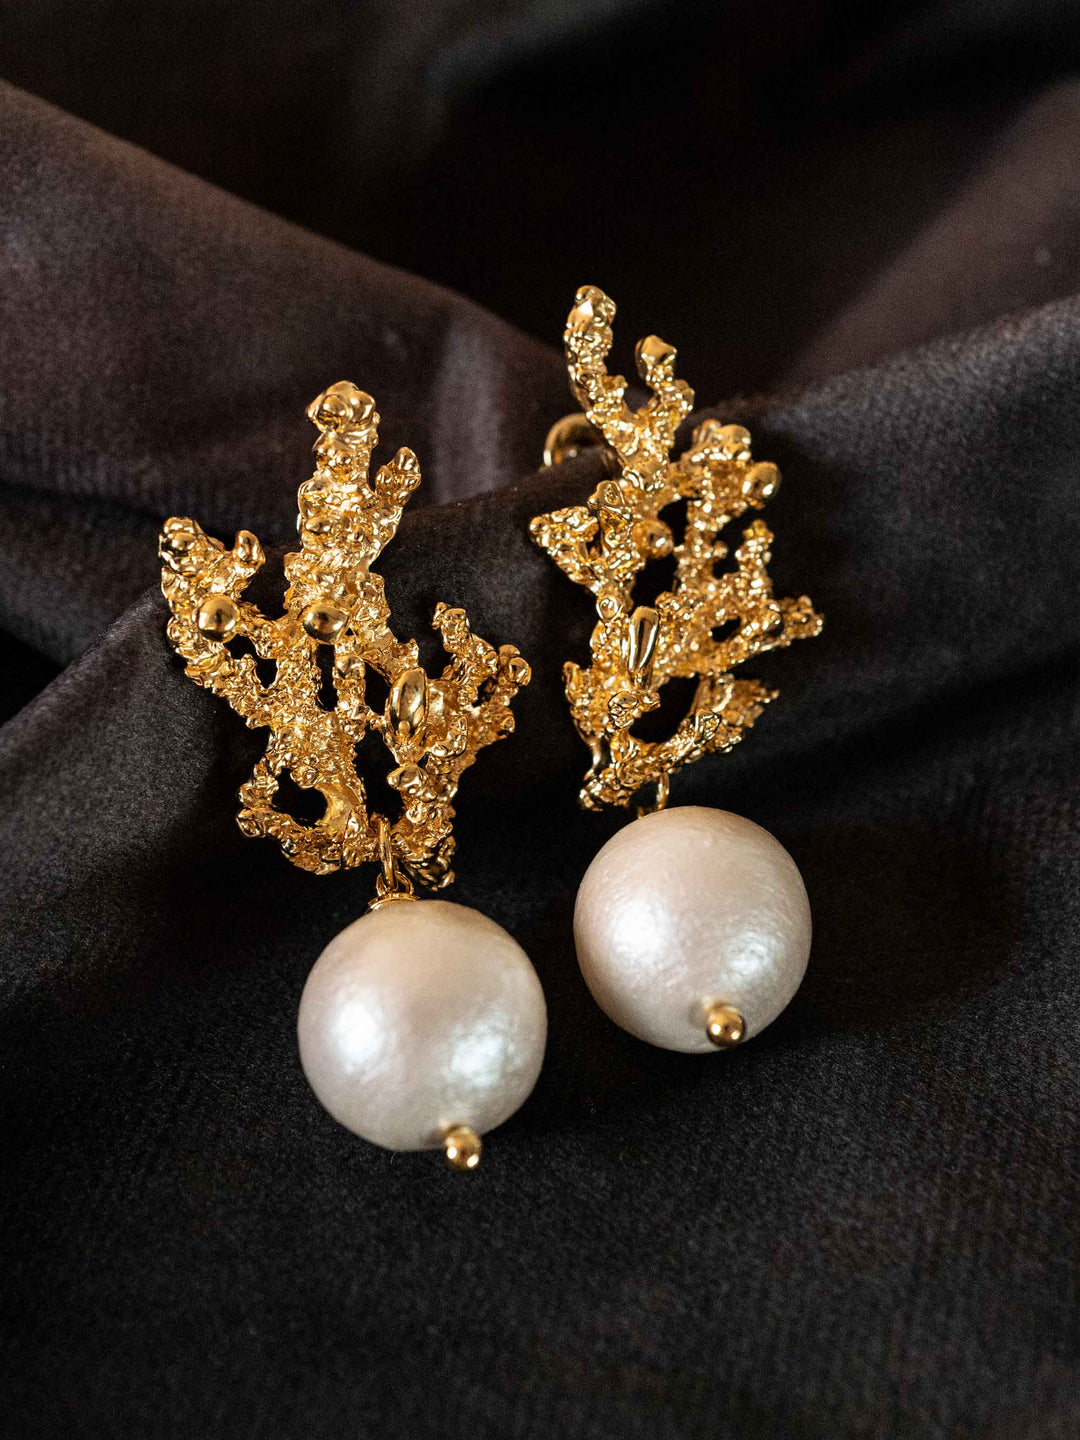 A pair of earrings with golden cotton pearls